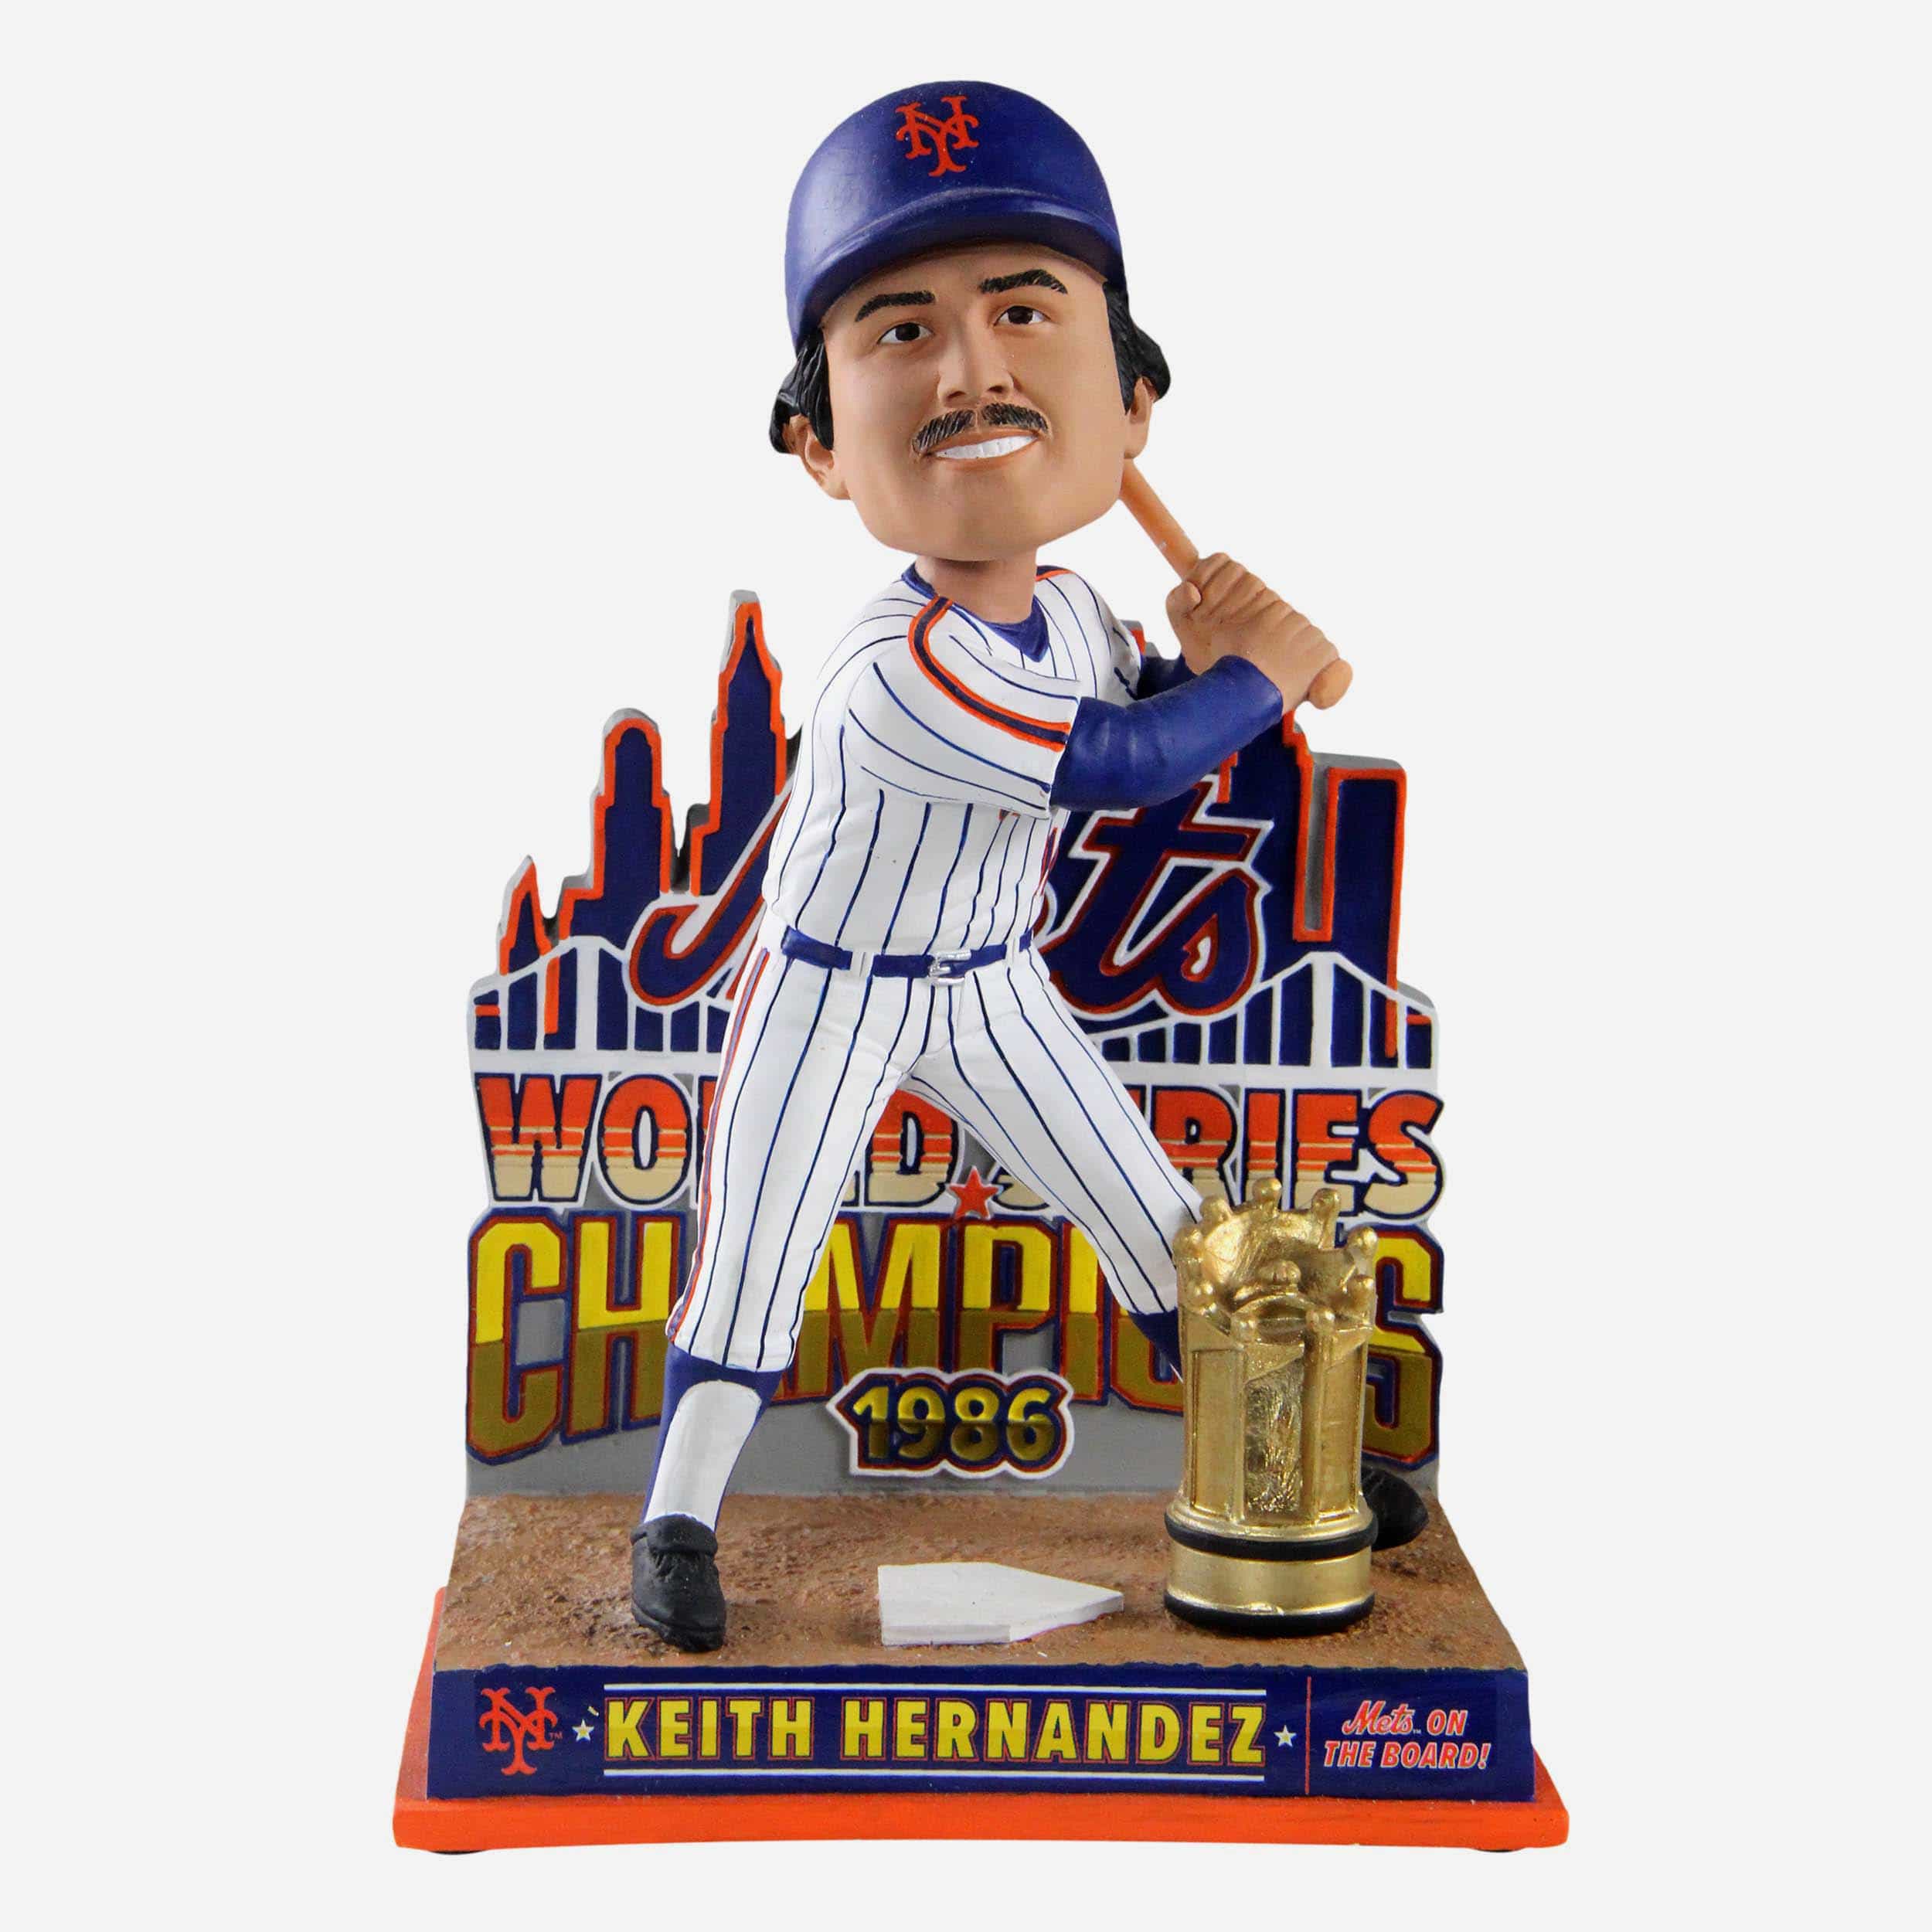 Keith Hernandez's 1986 World Series trophy up for auction 